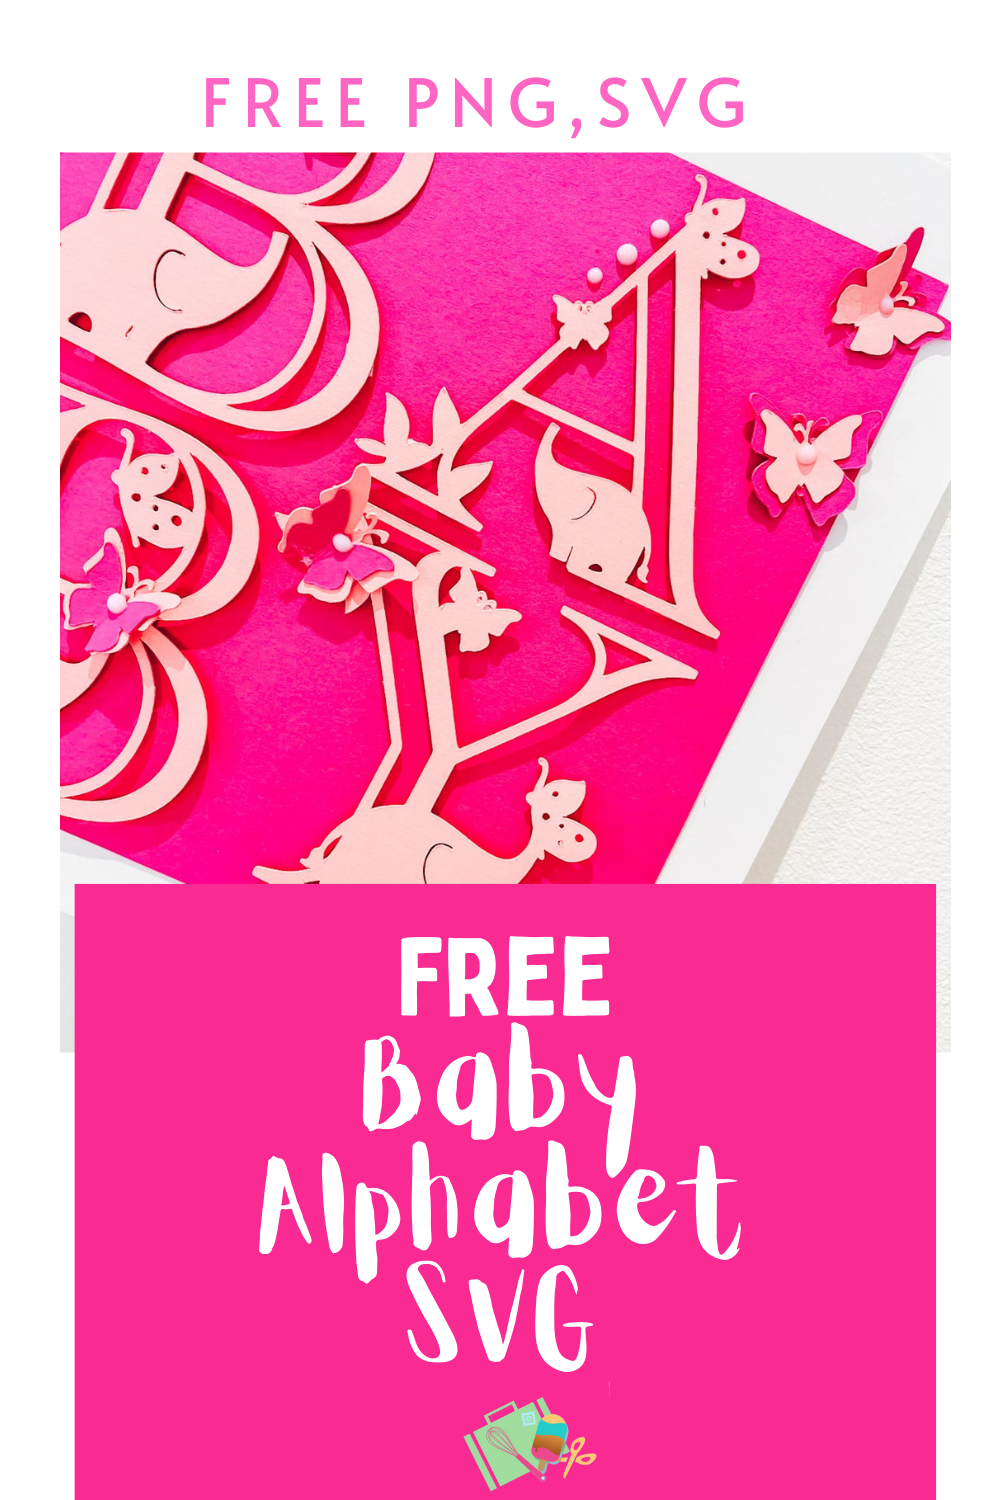 Free Elephant and butterfly baby alphabet SVG for nurseries